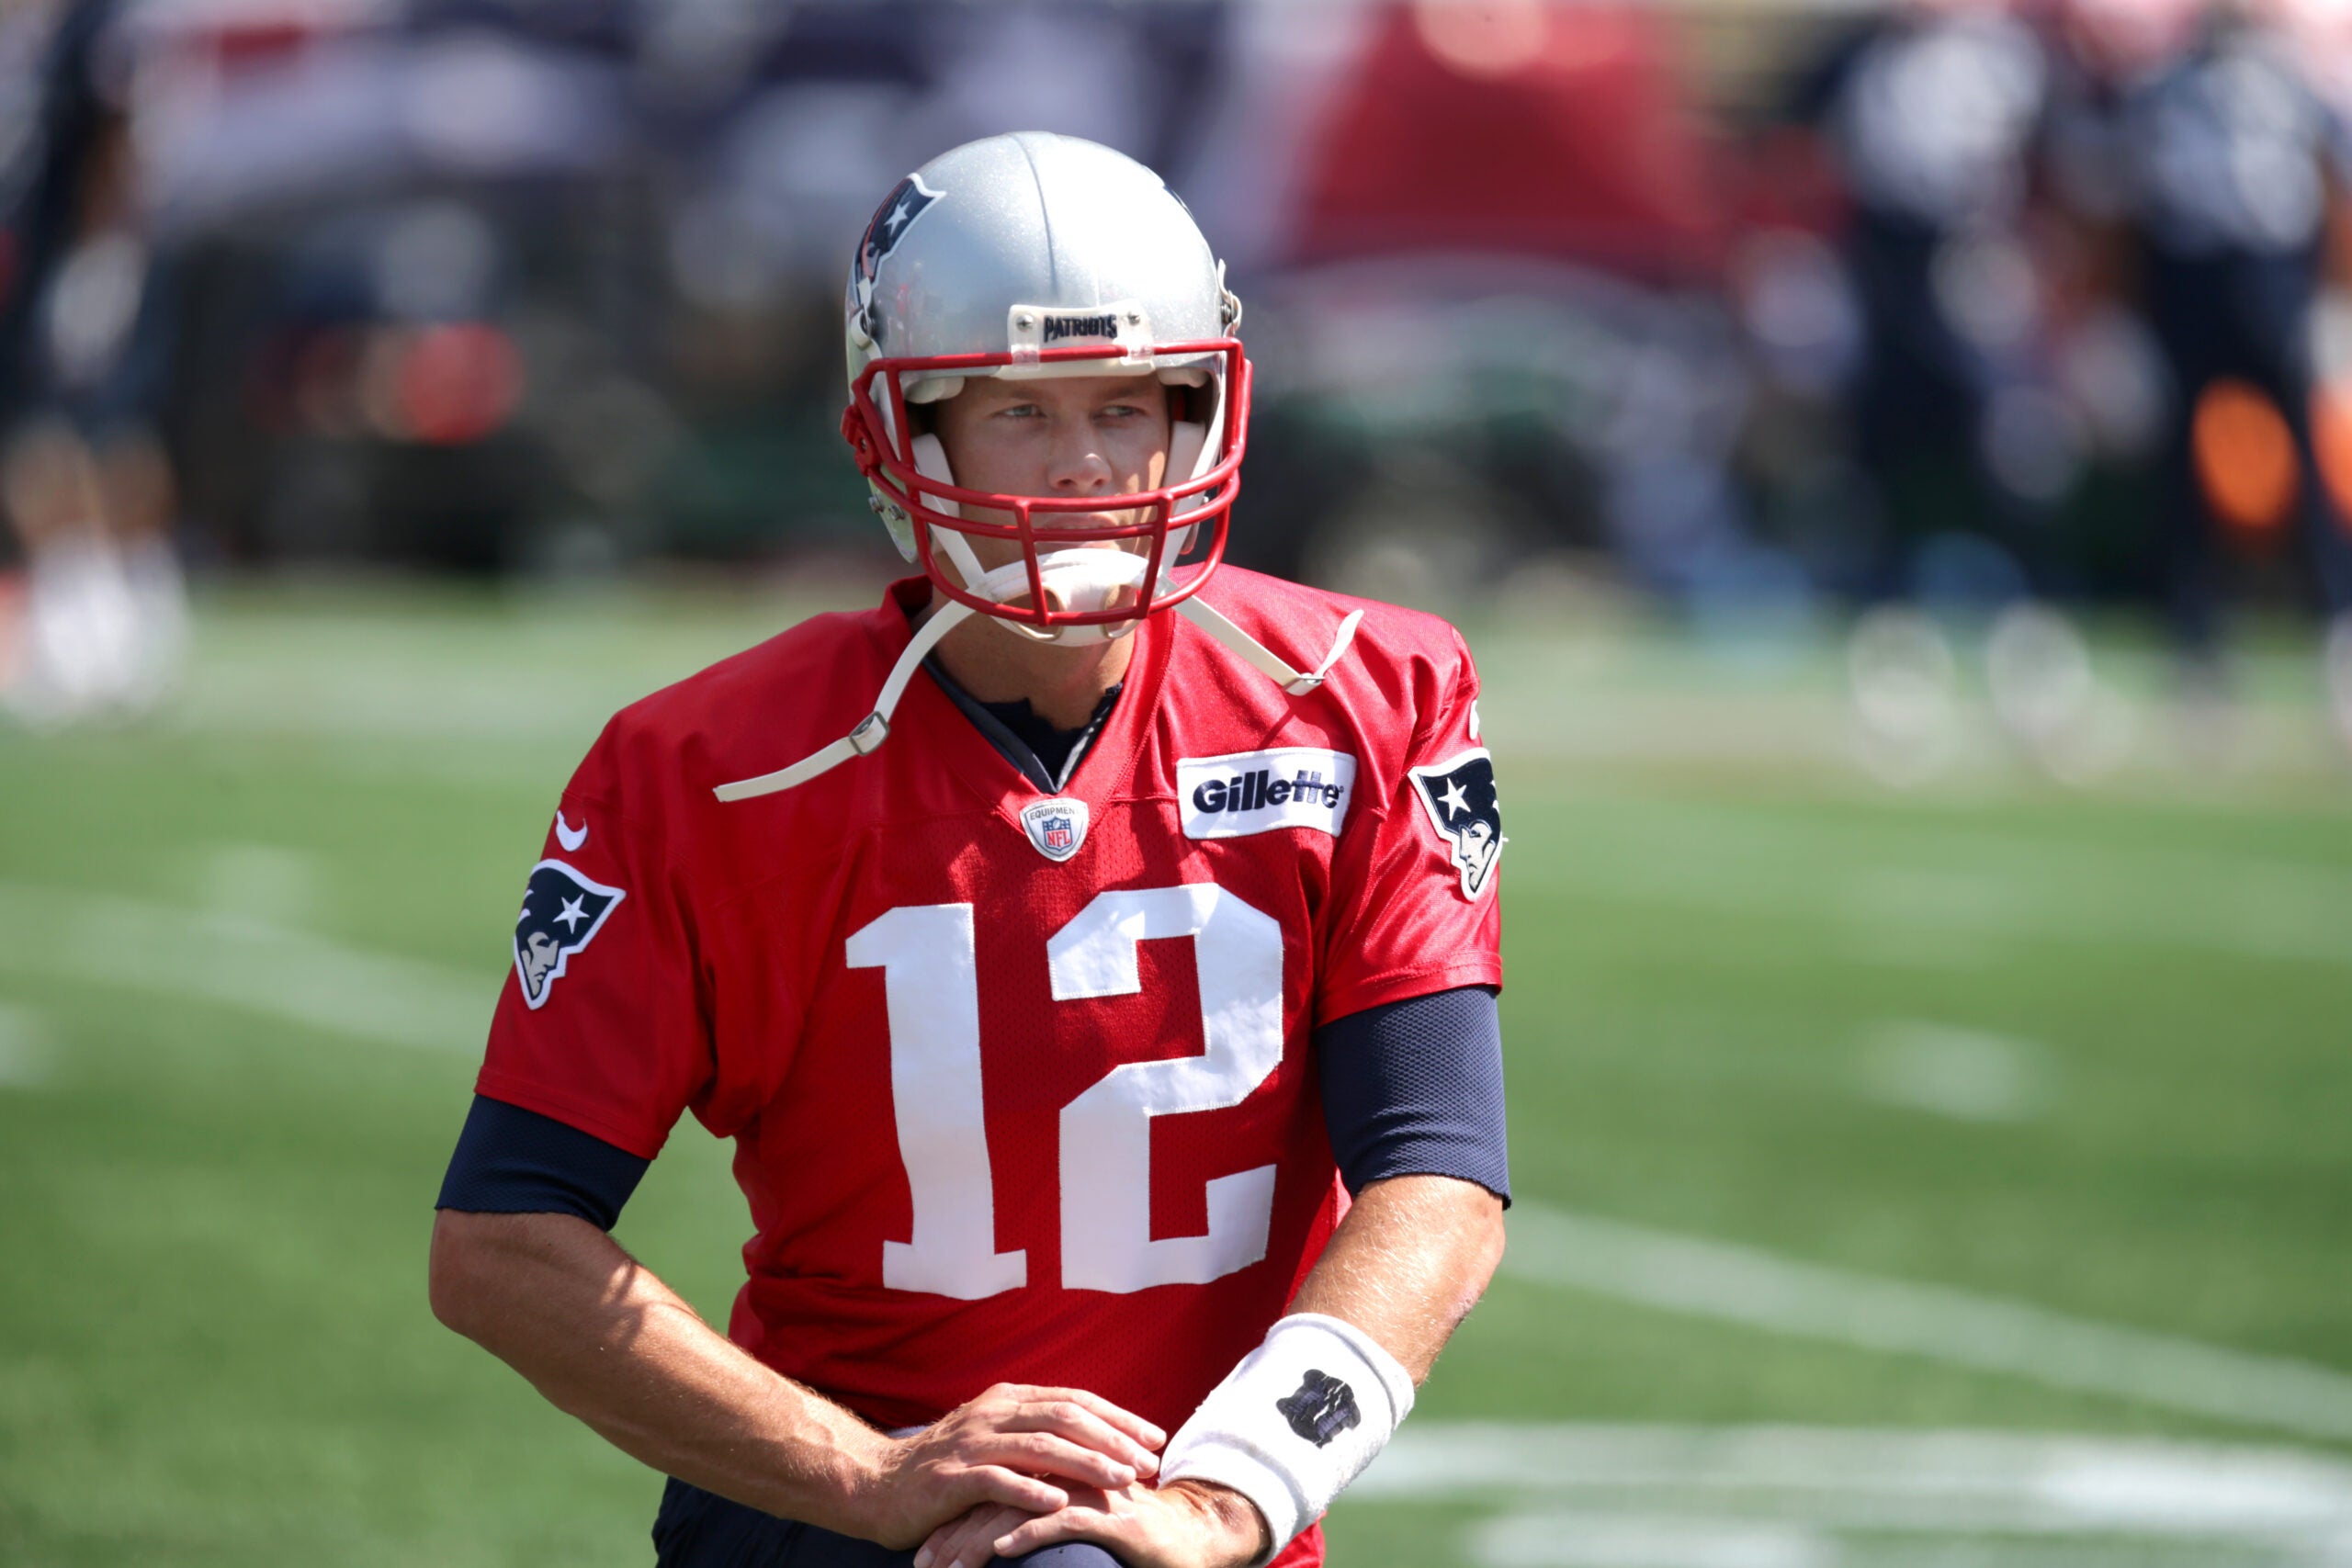 NFL, NFLPA conclude that Tom Brady did not have a concussion